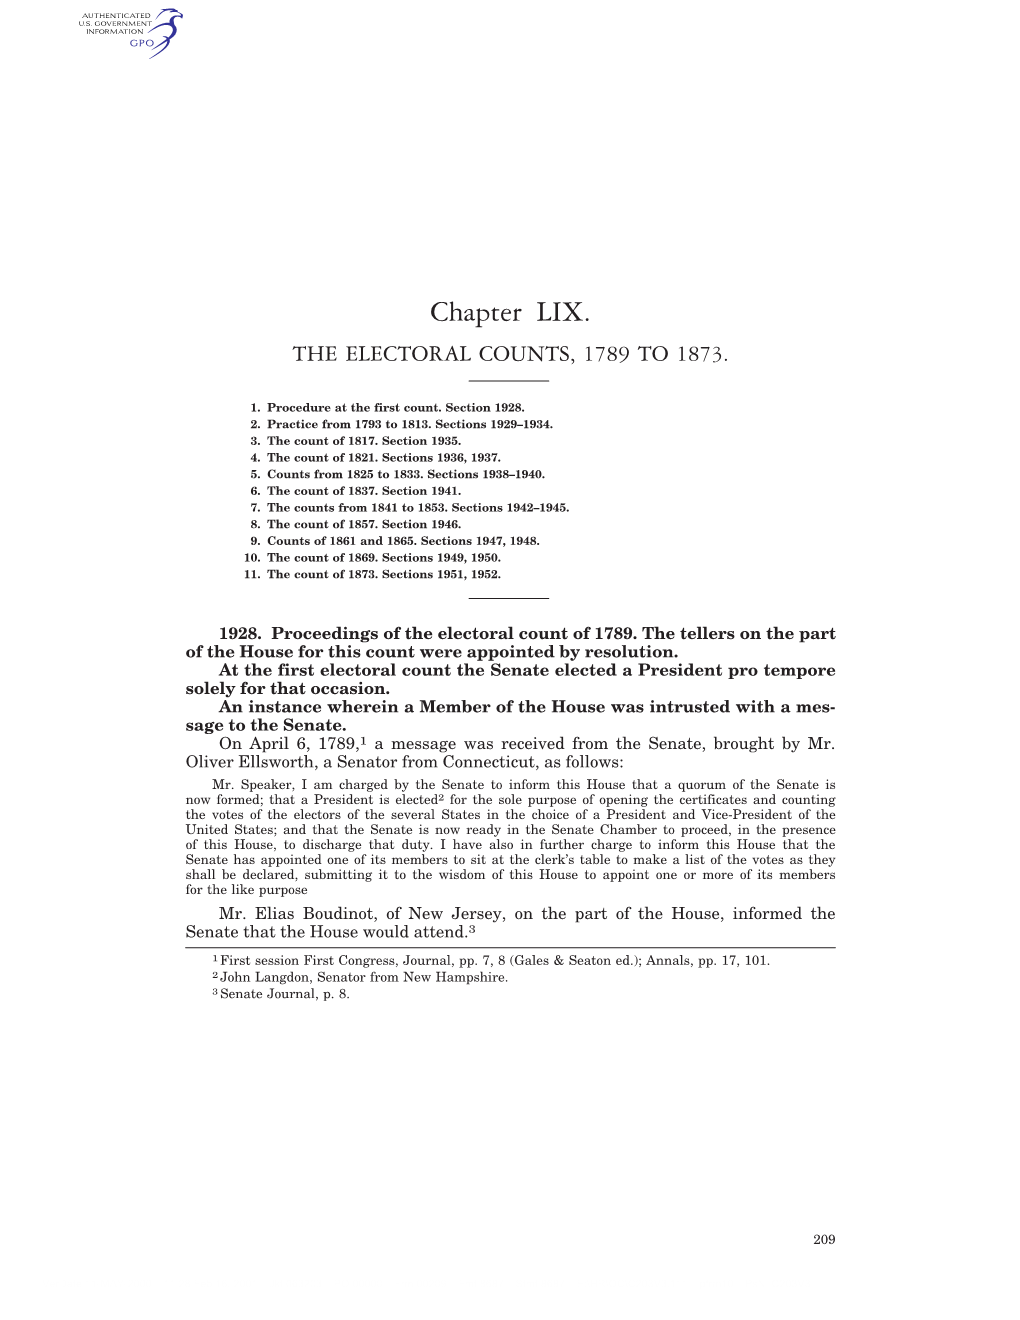 Chapter LIX. the ELECTORAL COUNTS, 1789 to 1873